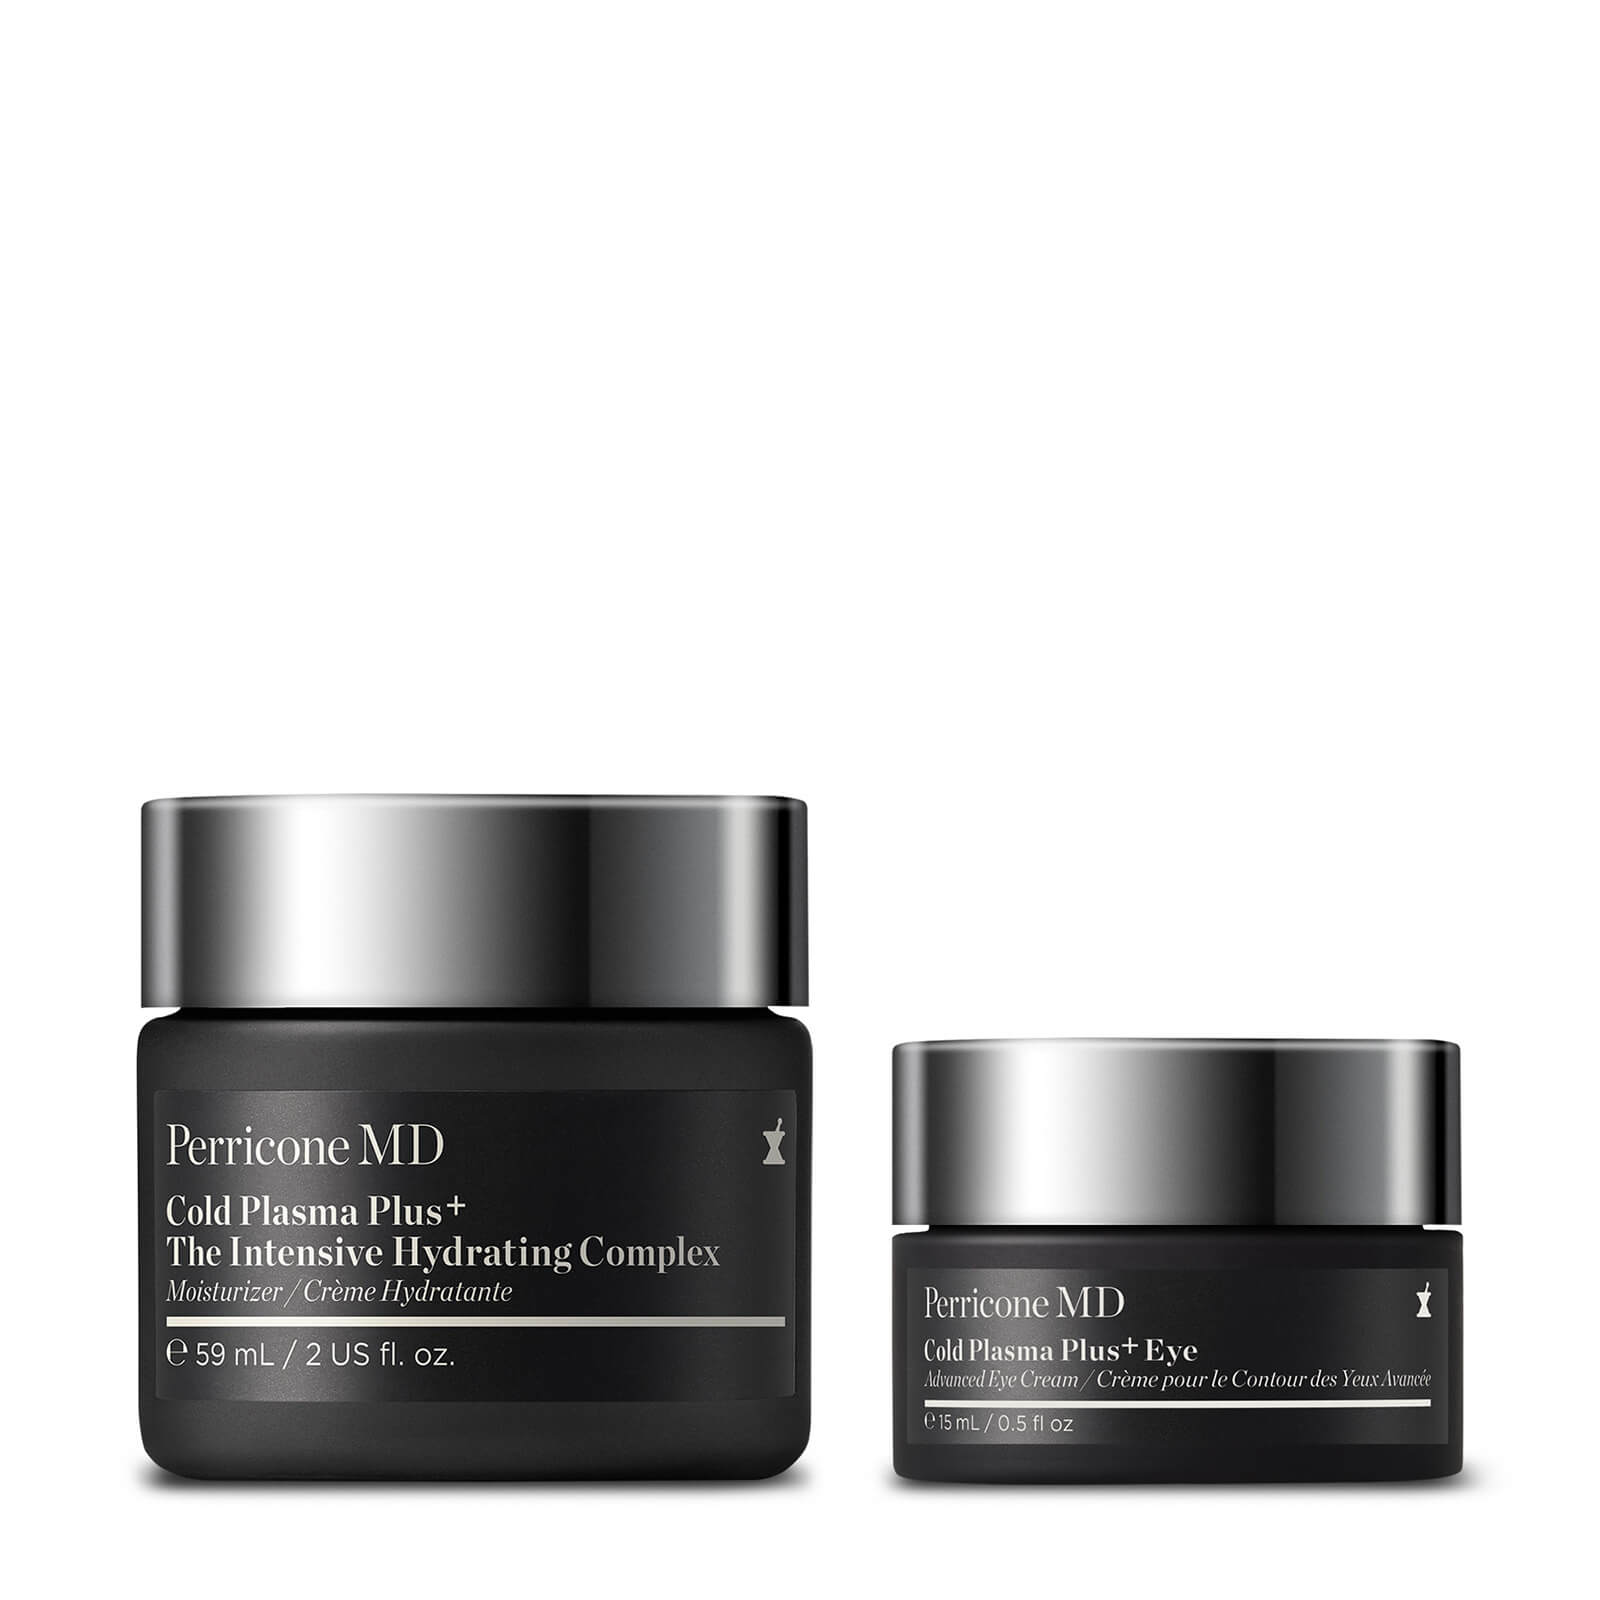 Perricone Md Advanced Hydrating Face & Eye Duo